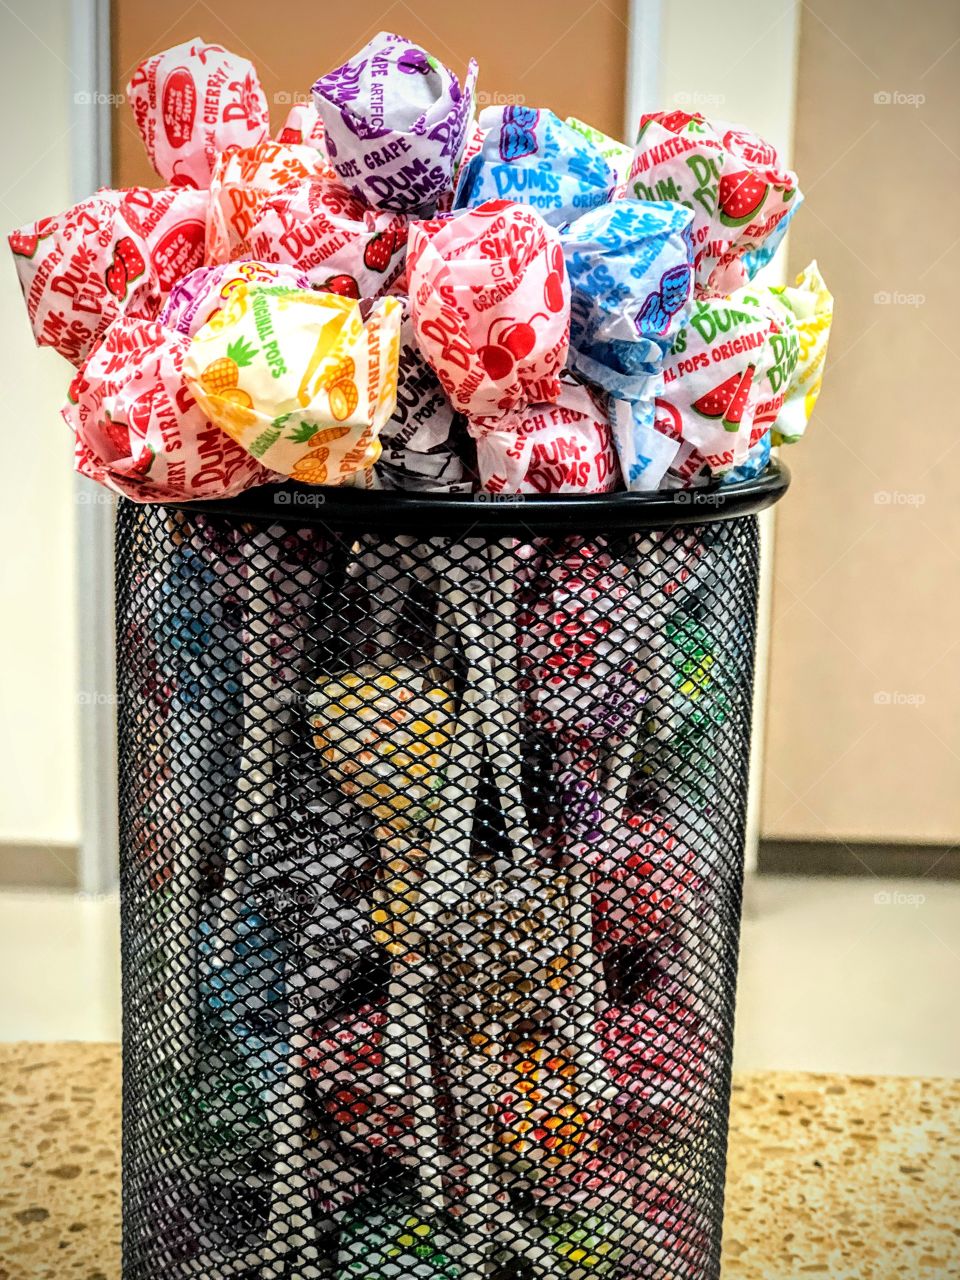 It is not easy going to the doctor’s, but it sure makes it easier when you get a couple of lollipops on the way out of the office.